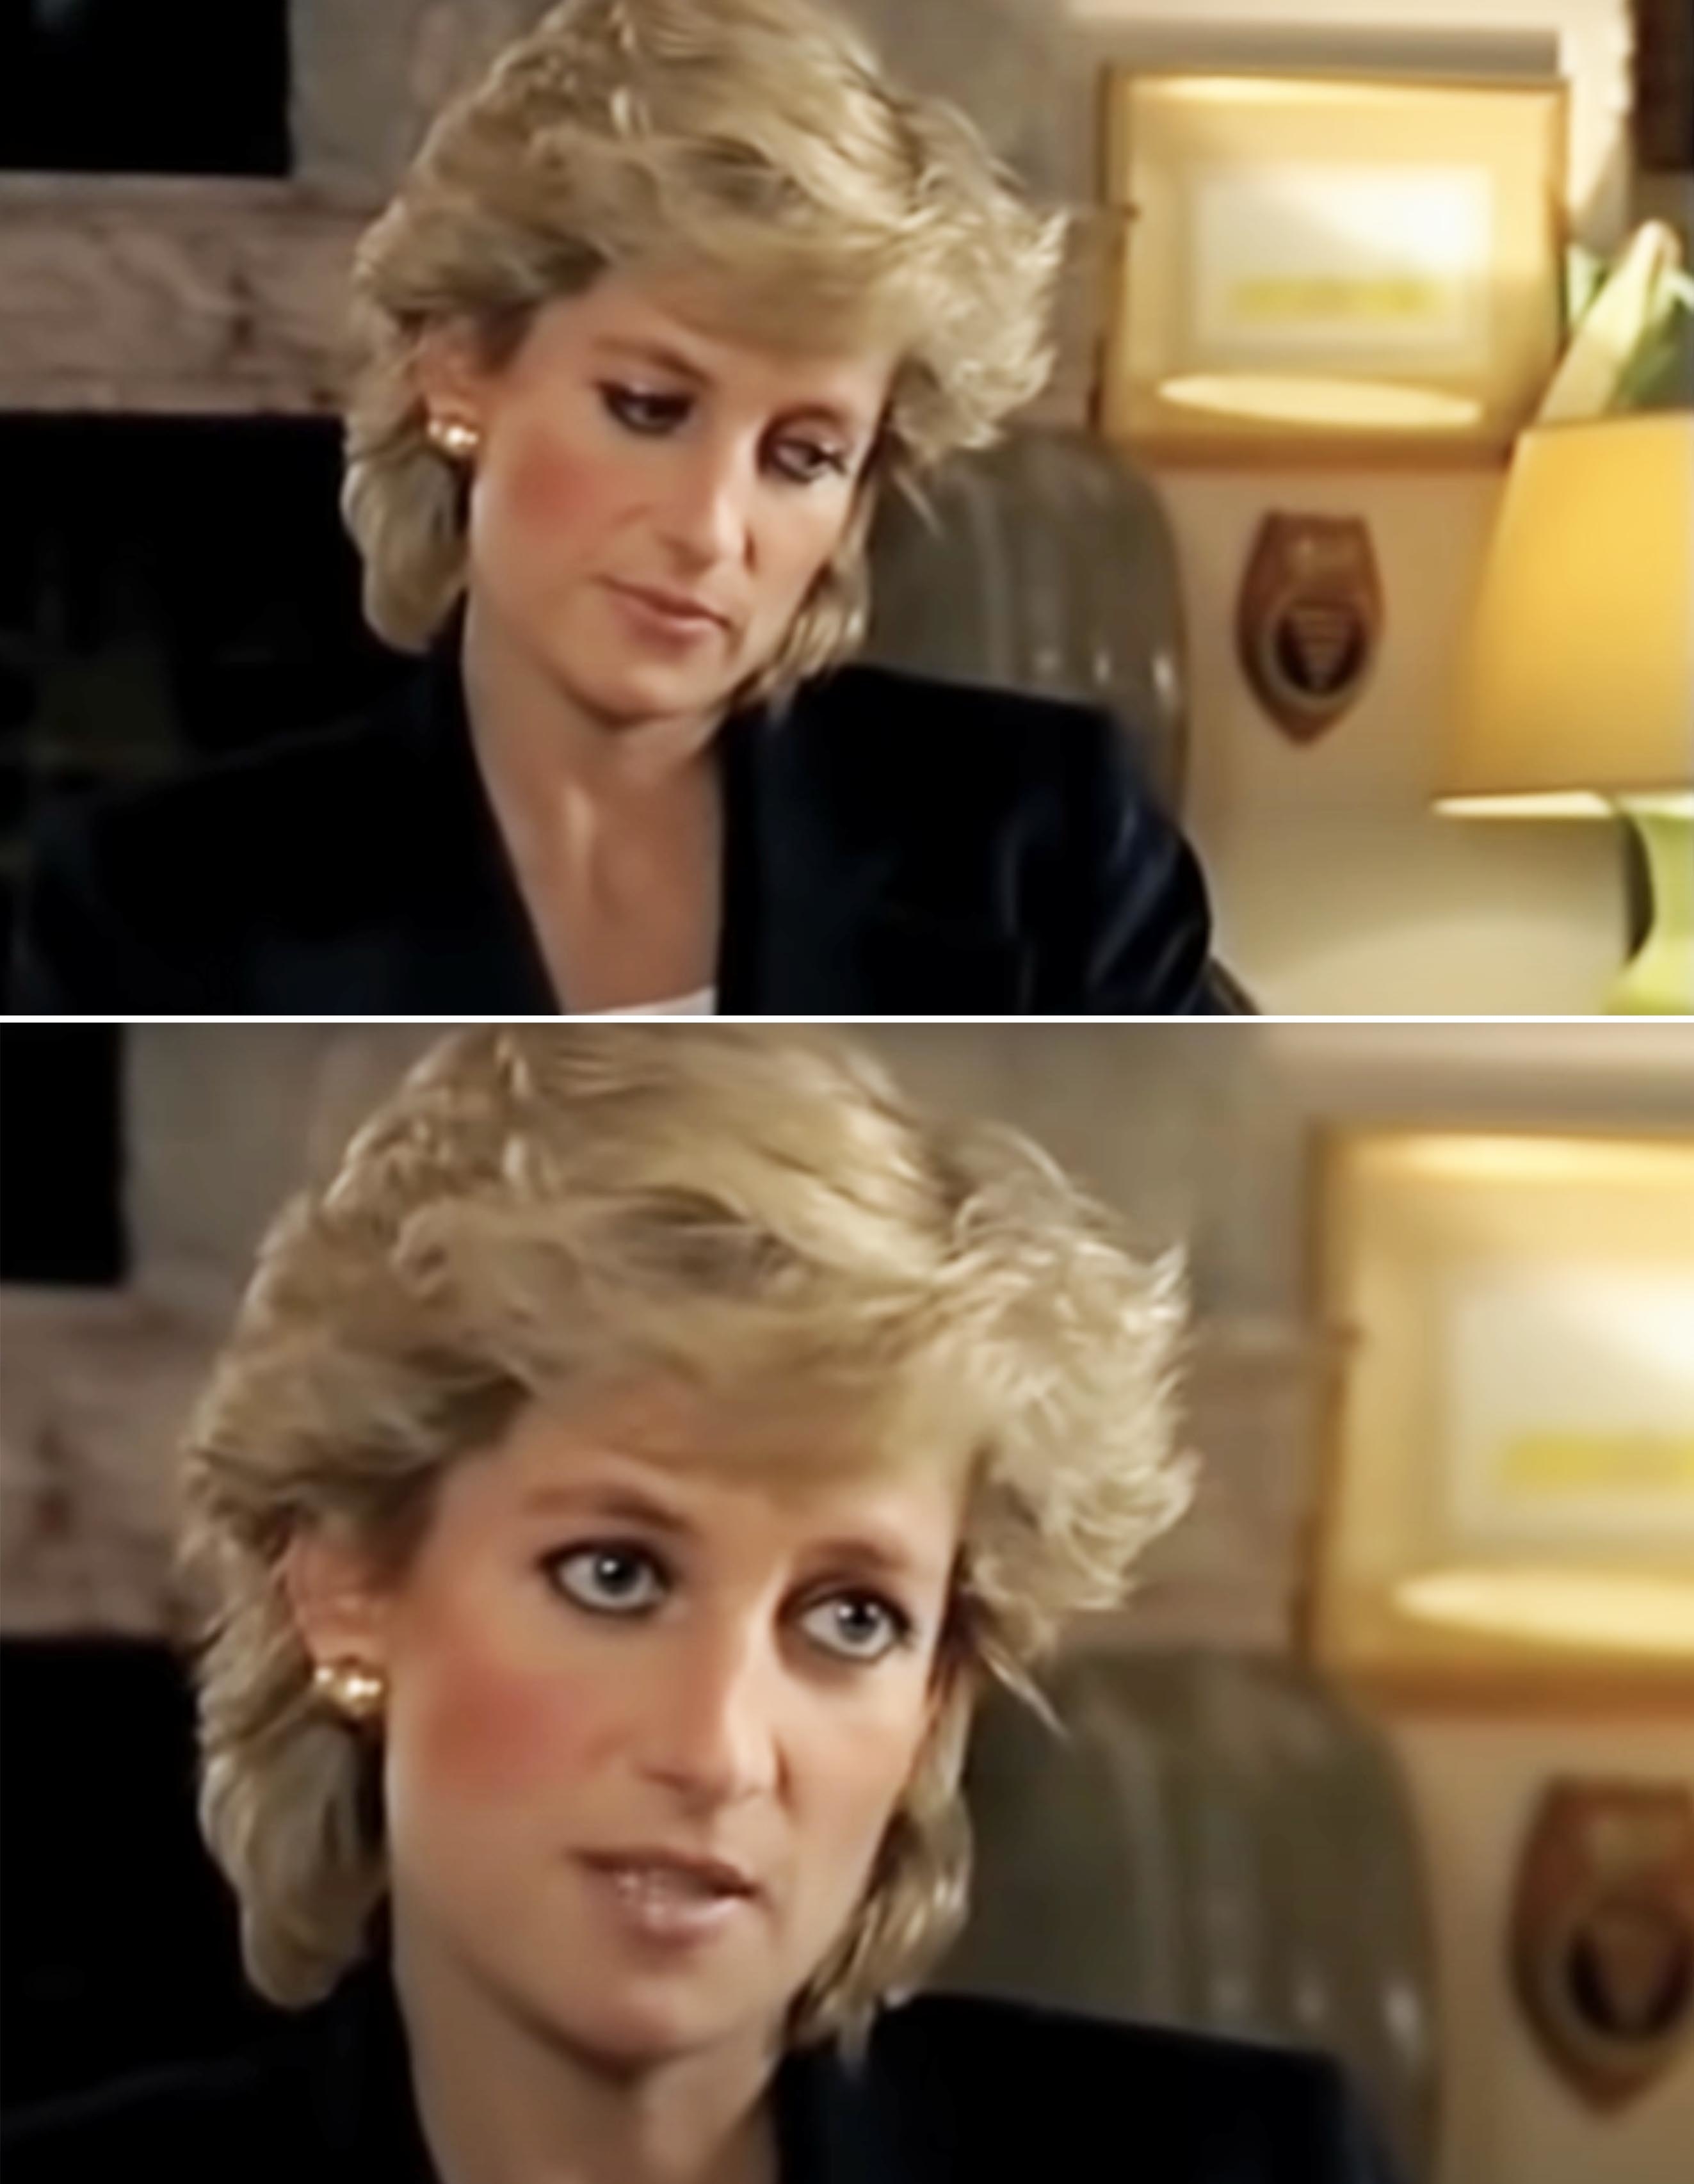 Princess Diana in a sit-down interview, looking thoughtful. She wears a light blouse